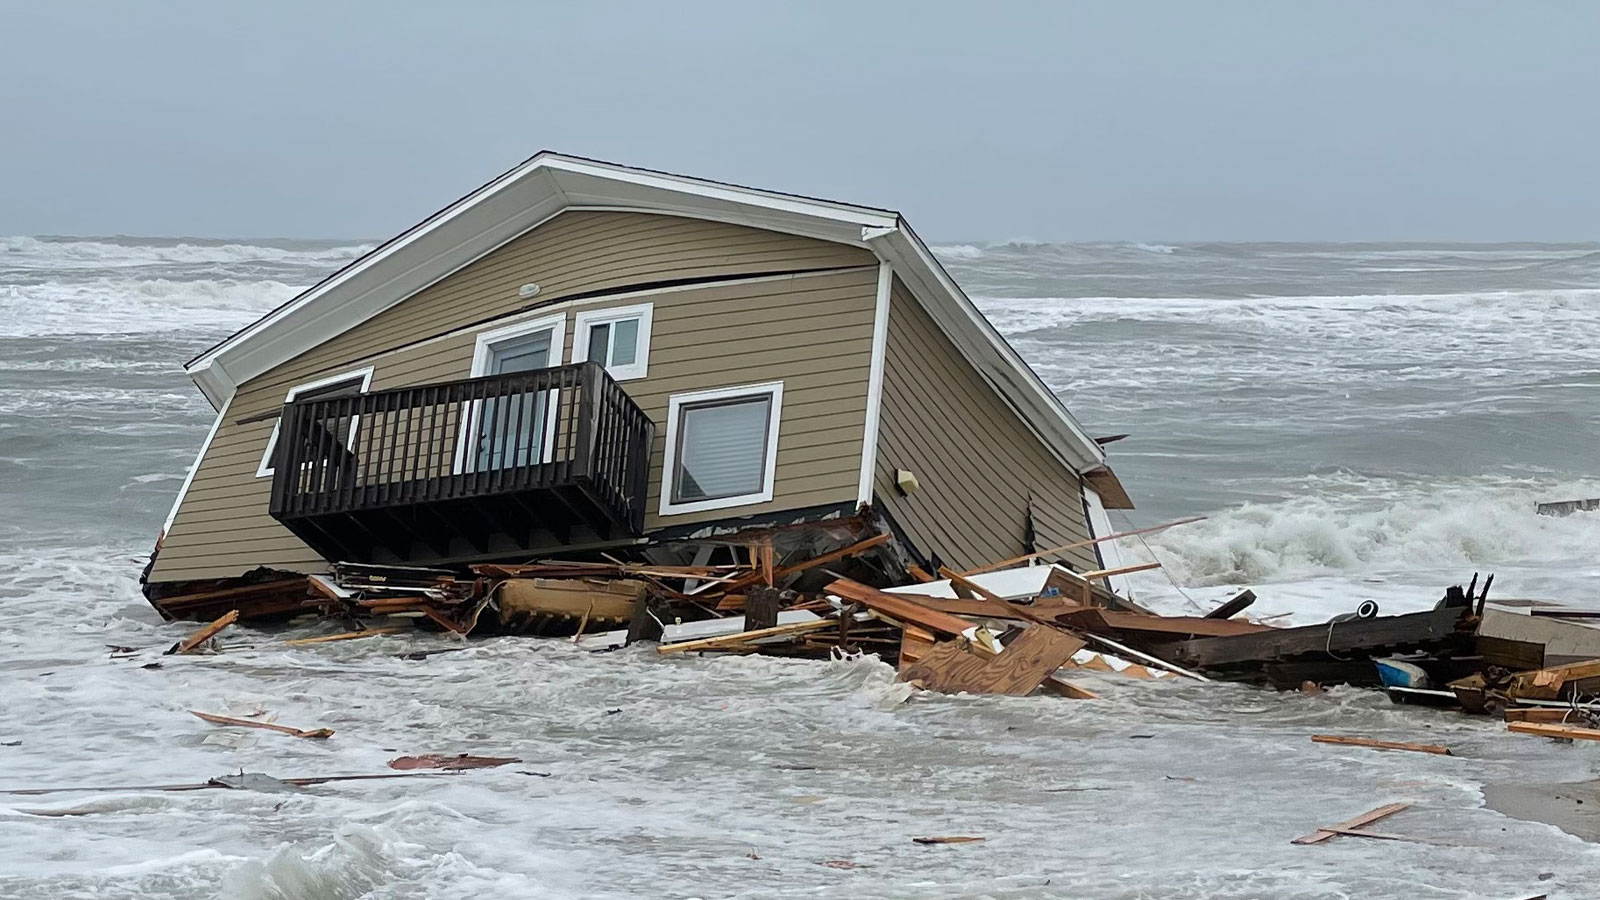 House collapsed into the ocean with debris around it